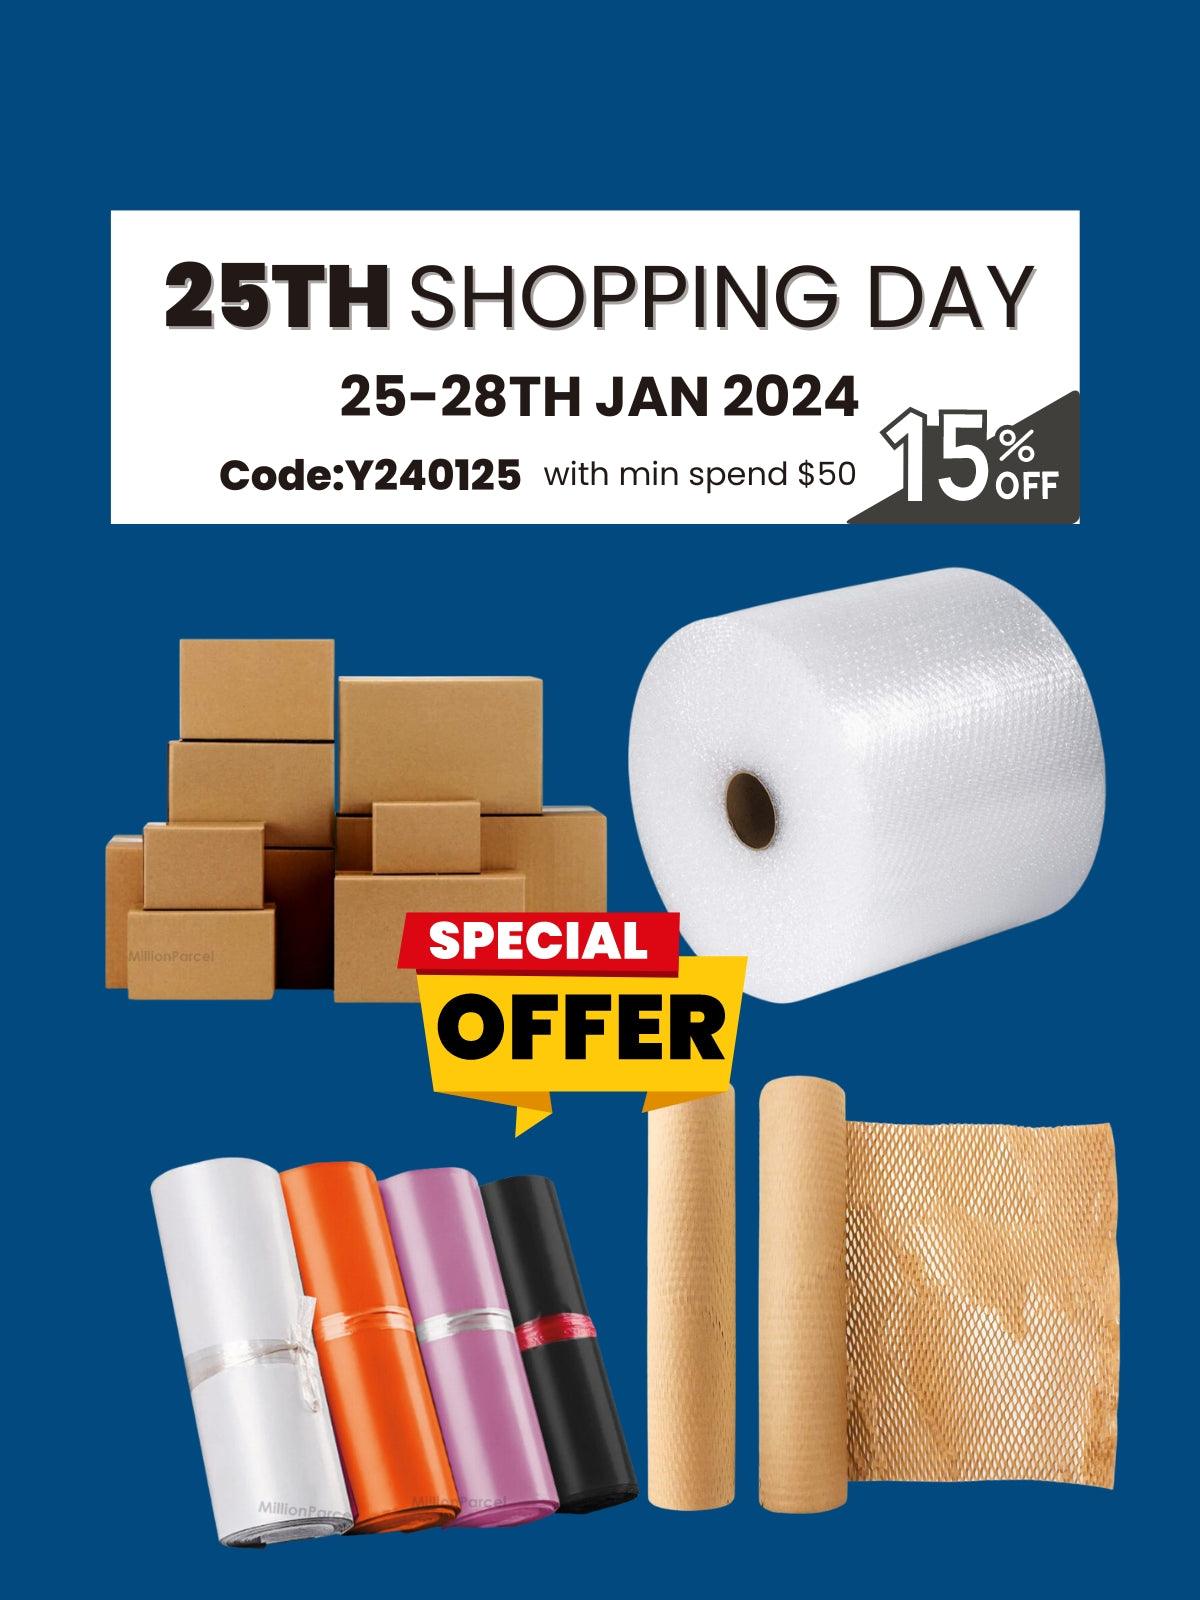 🎉 Celebrate the 25th Shopping Day Extravaganza with Perfect Packaging Deals! 🎉